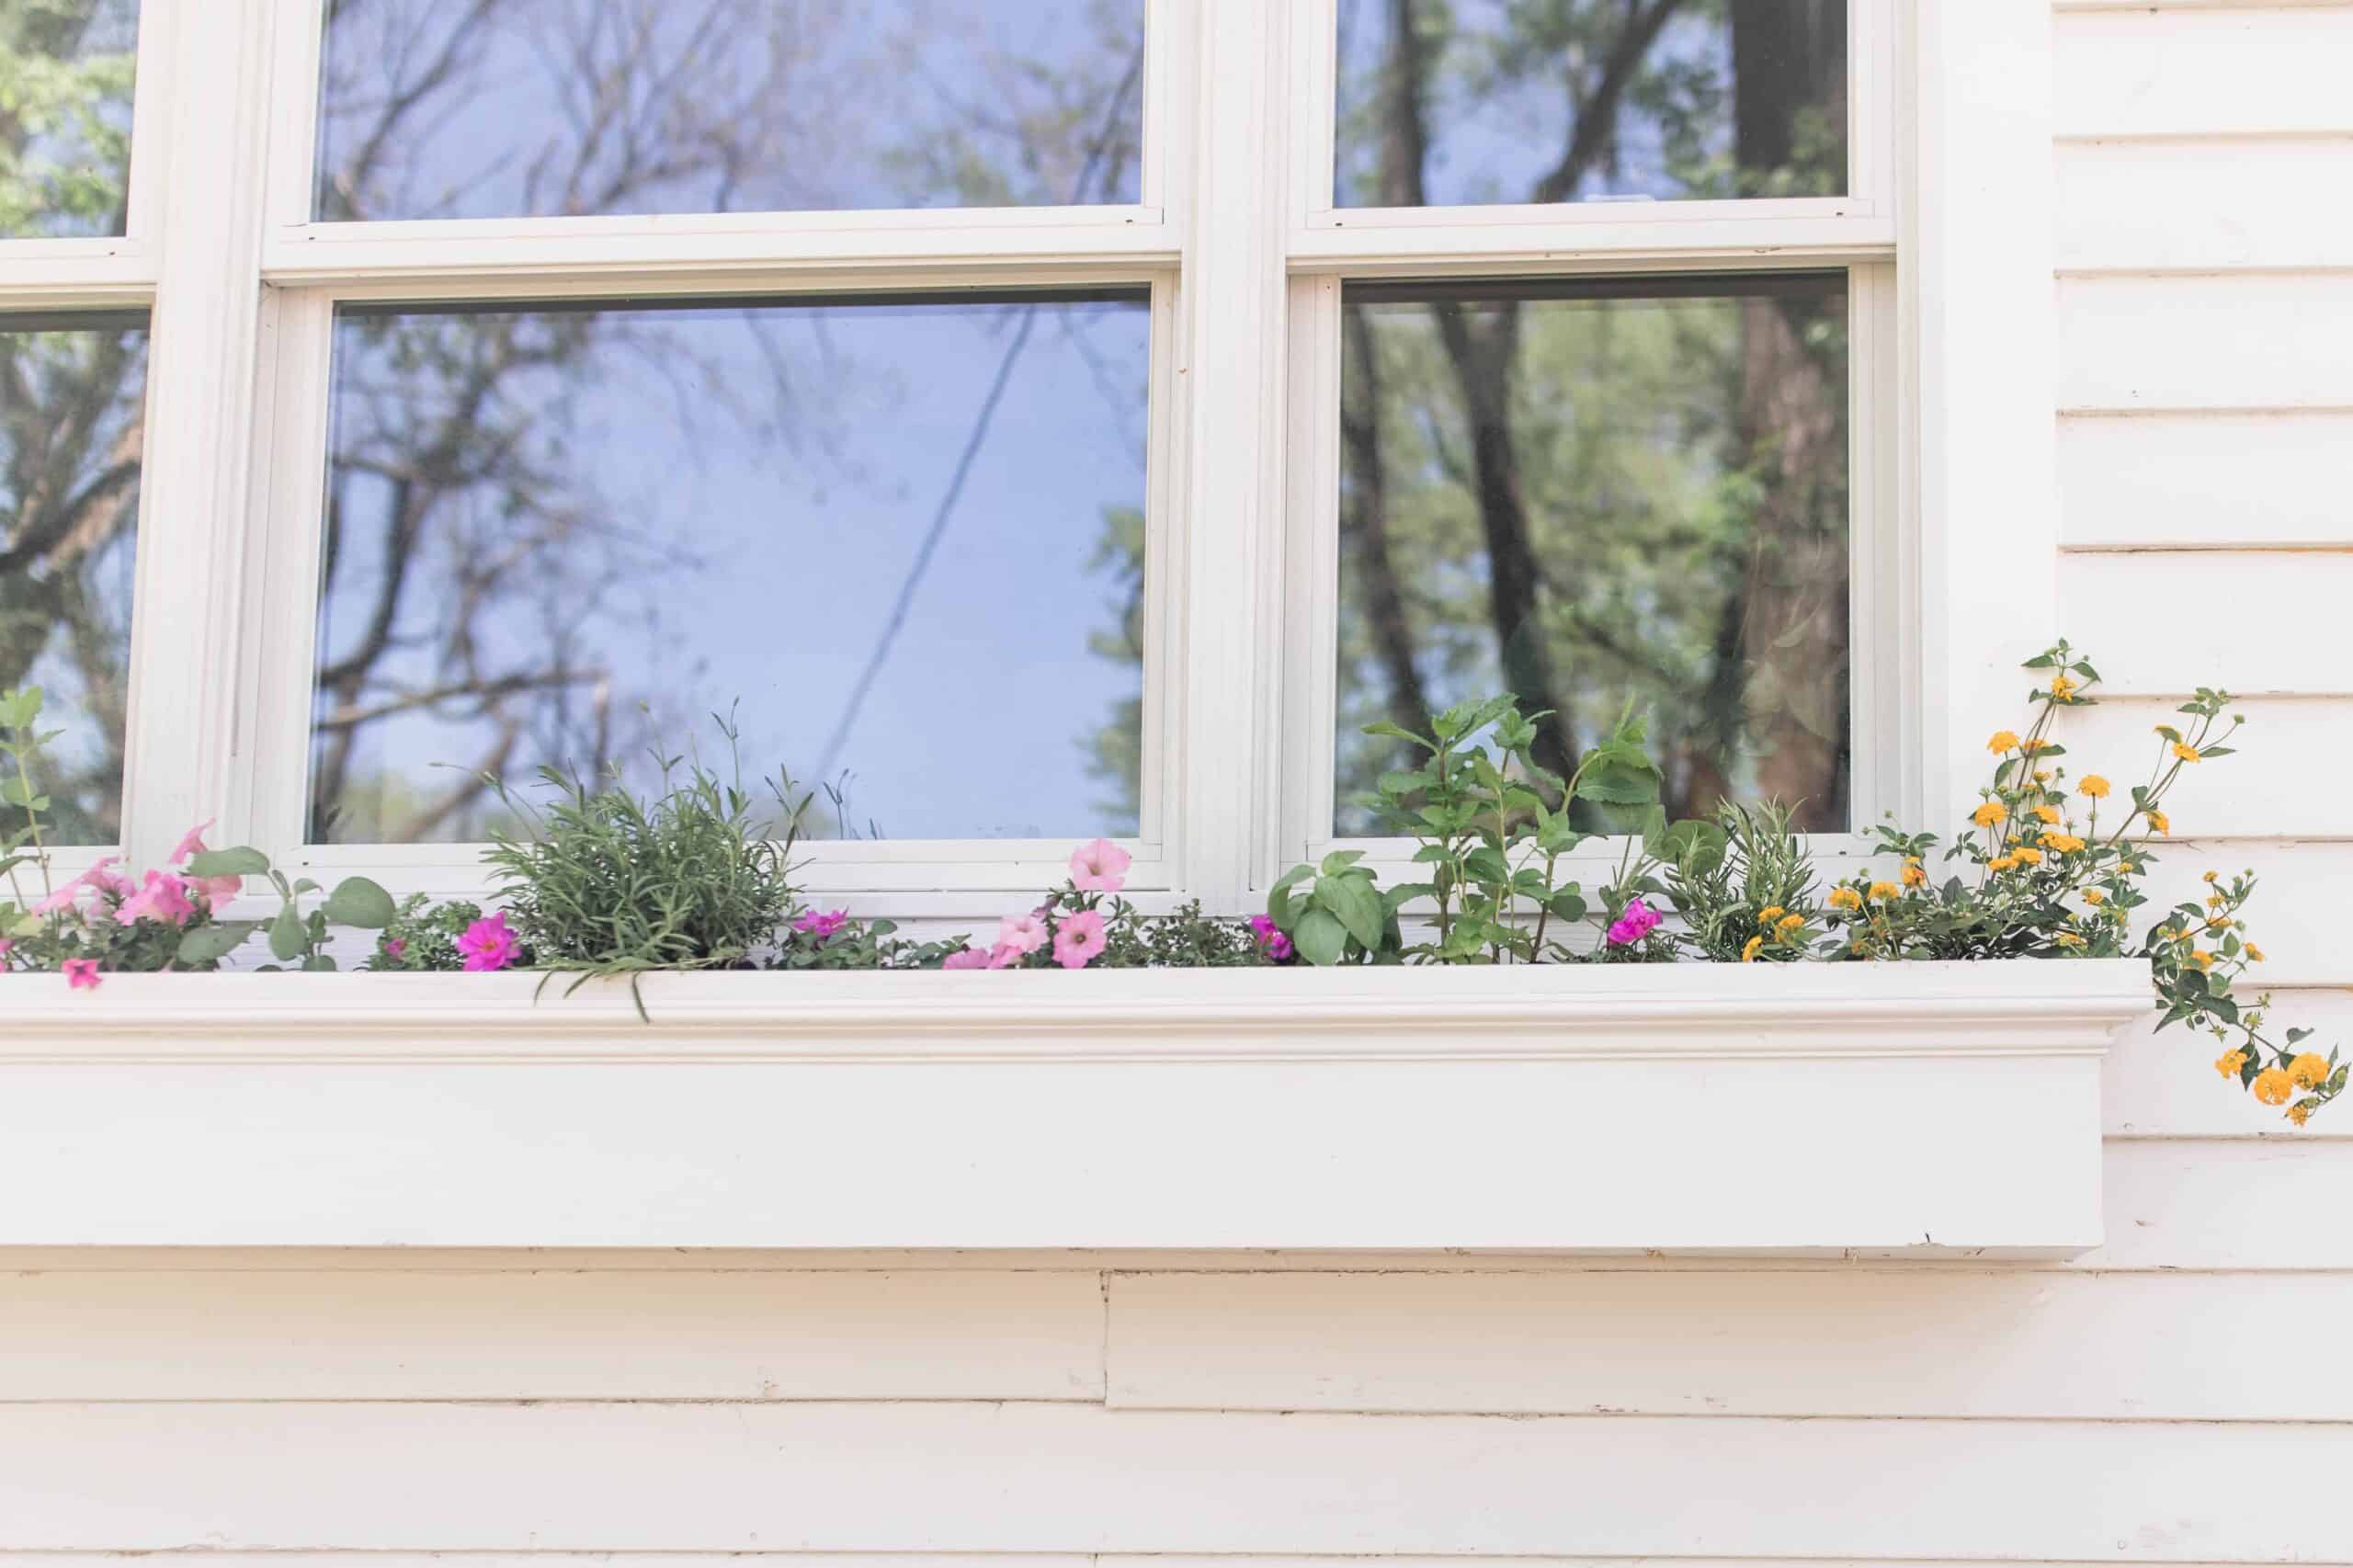 a white window box hanging below a window on a white farmhouse with pink and yellow flowers in it.